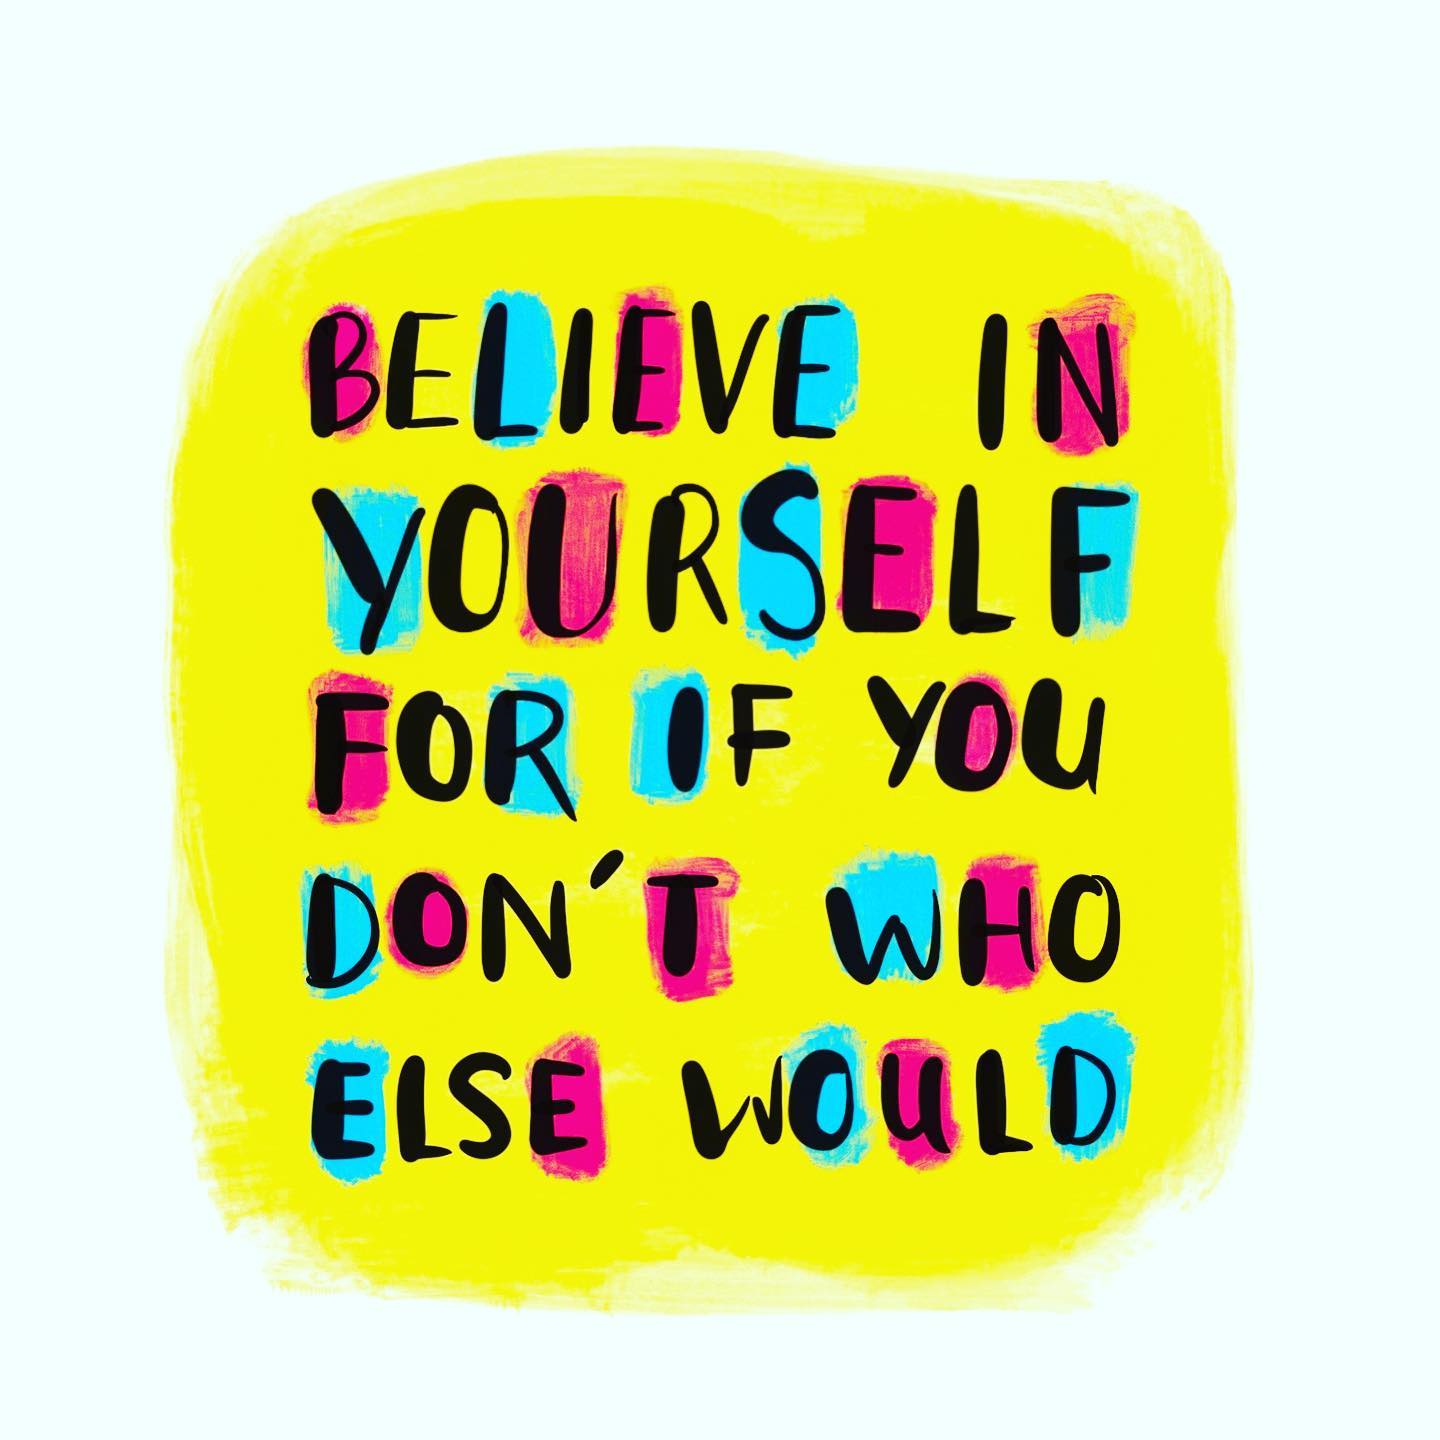 Believe in yourself, for if you don’t, who else would.